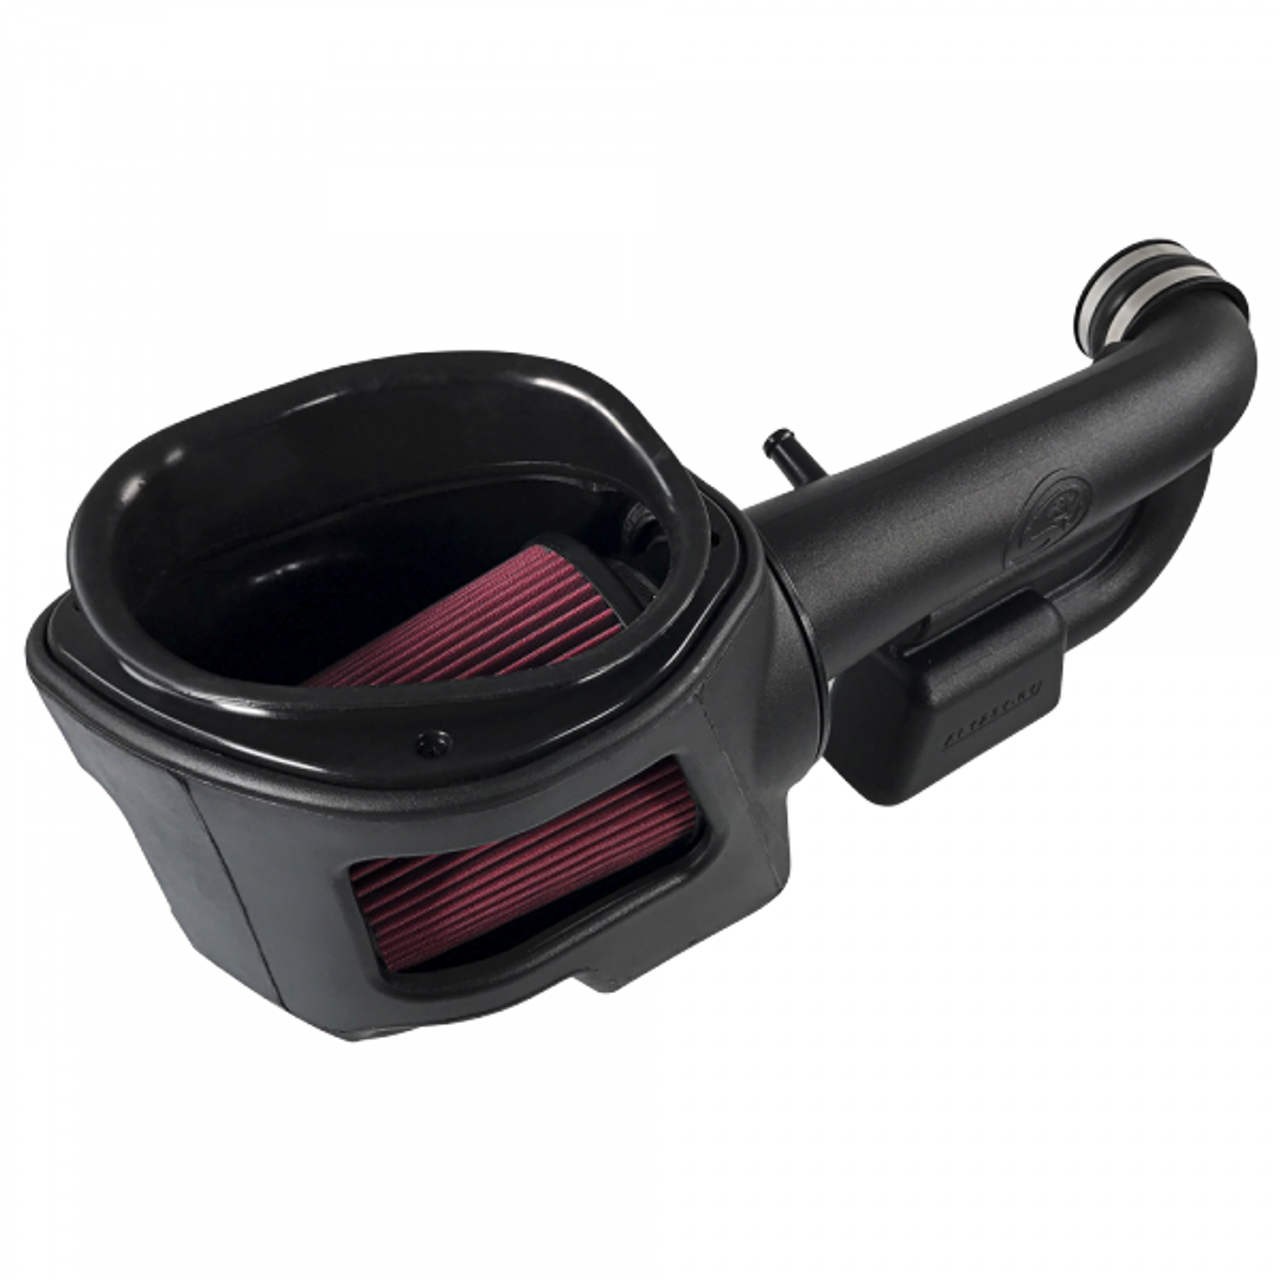 S&B Filters 75-5060 Cold Air Intake for 2012-2016 Jeep Wrangler JK